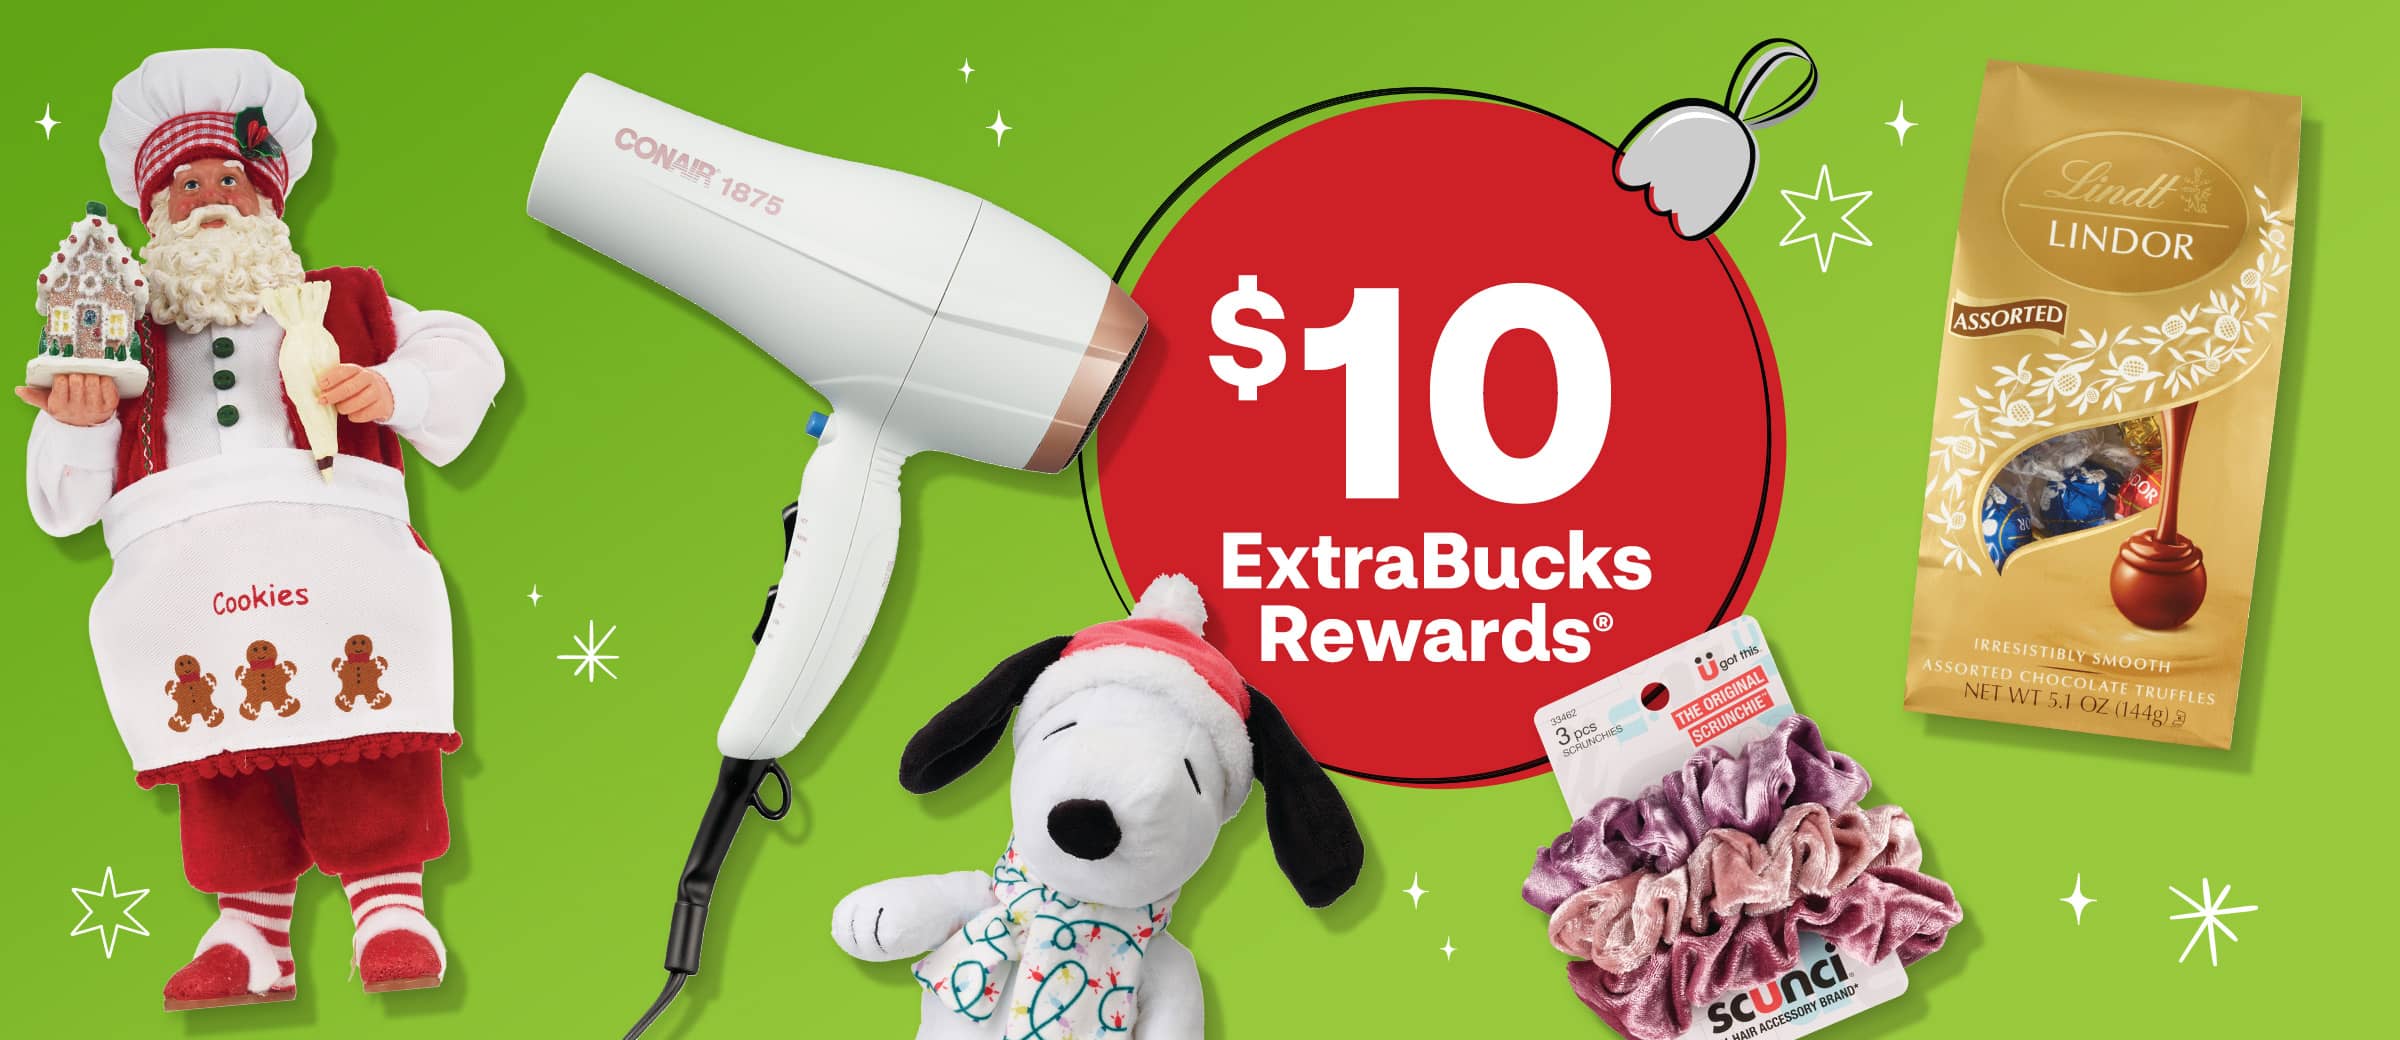 Look for this symbol for extra holiday savings! arrow pointing to ExtraCare holiday savings icon, $10 ExtraBucks Rewards*, examples of products available